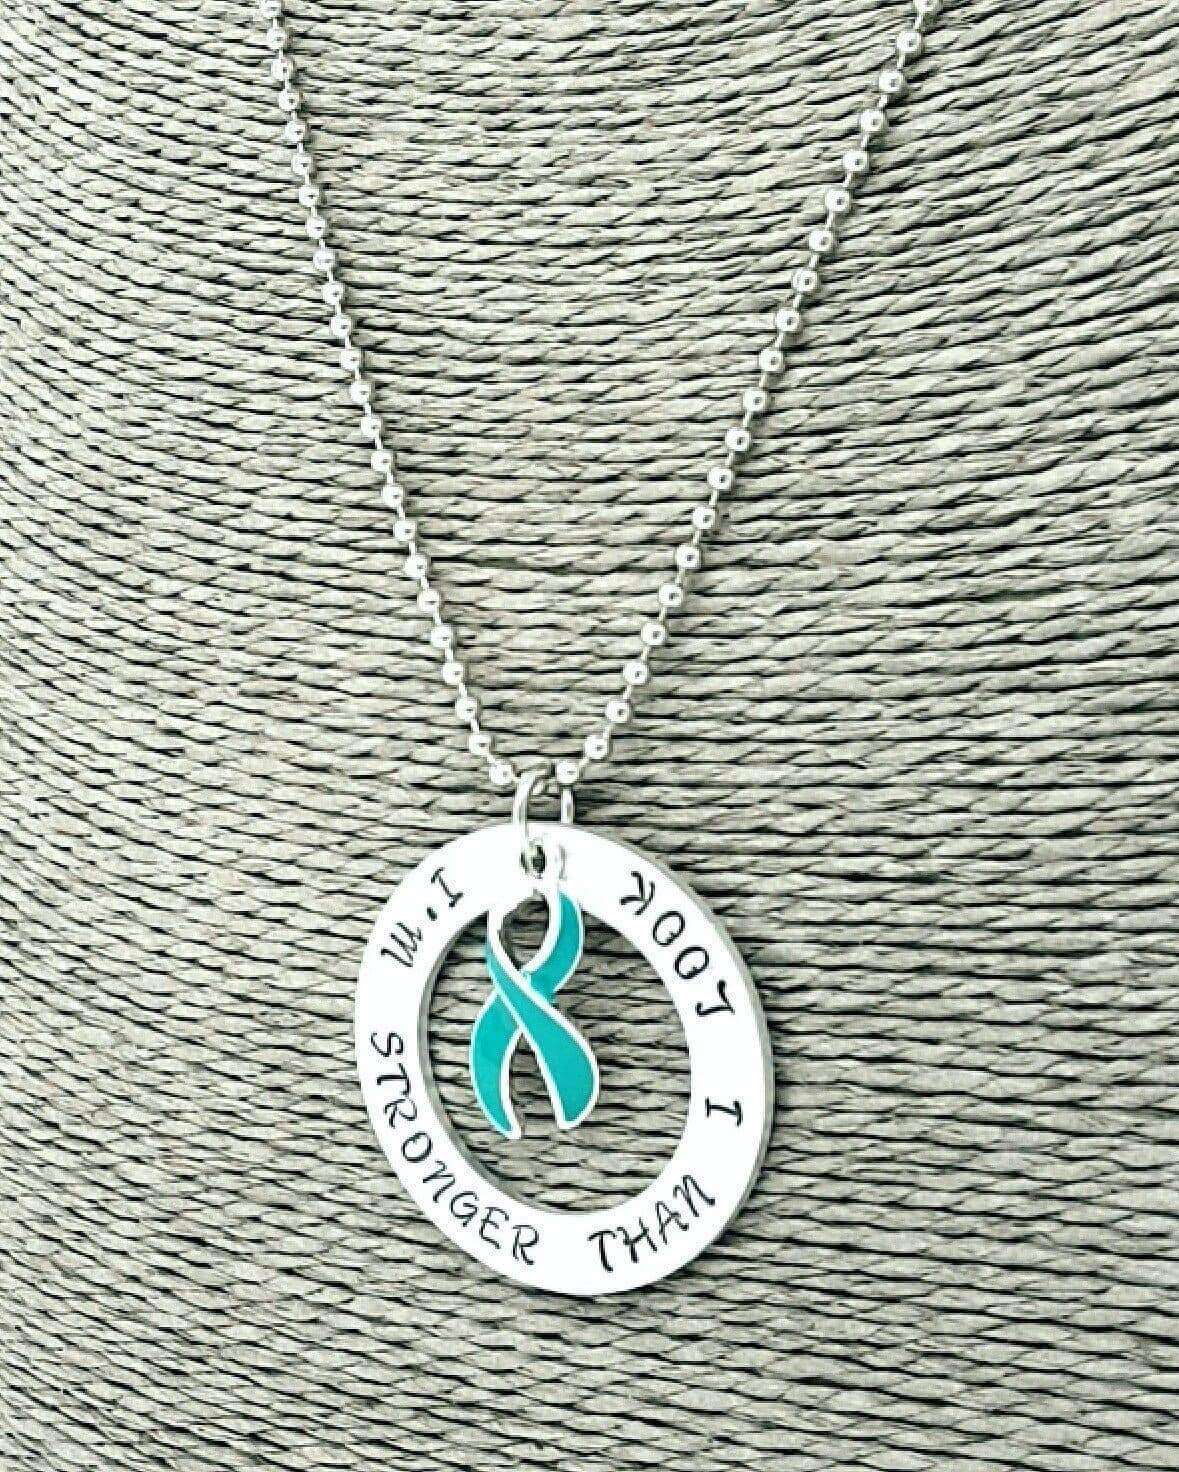 I'm Stronger Than I Look necklace - Ovarian Cancer, Scleroderma, PTSD, Ocd, Tourette's Synodrome, Necklaces, HandmadeLoveStories, HandmadeLoveStories , [Handmade_Love_Stories], [Hand_Stamped_Jewelry], [Etsy_Stamped_Jewelry], [Etsy_Jewelry]